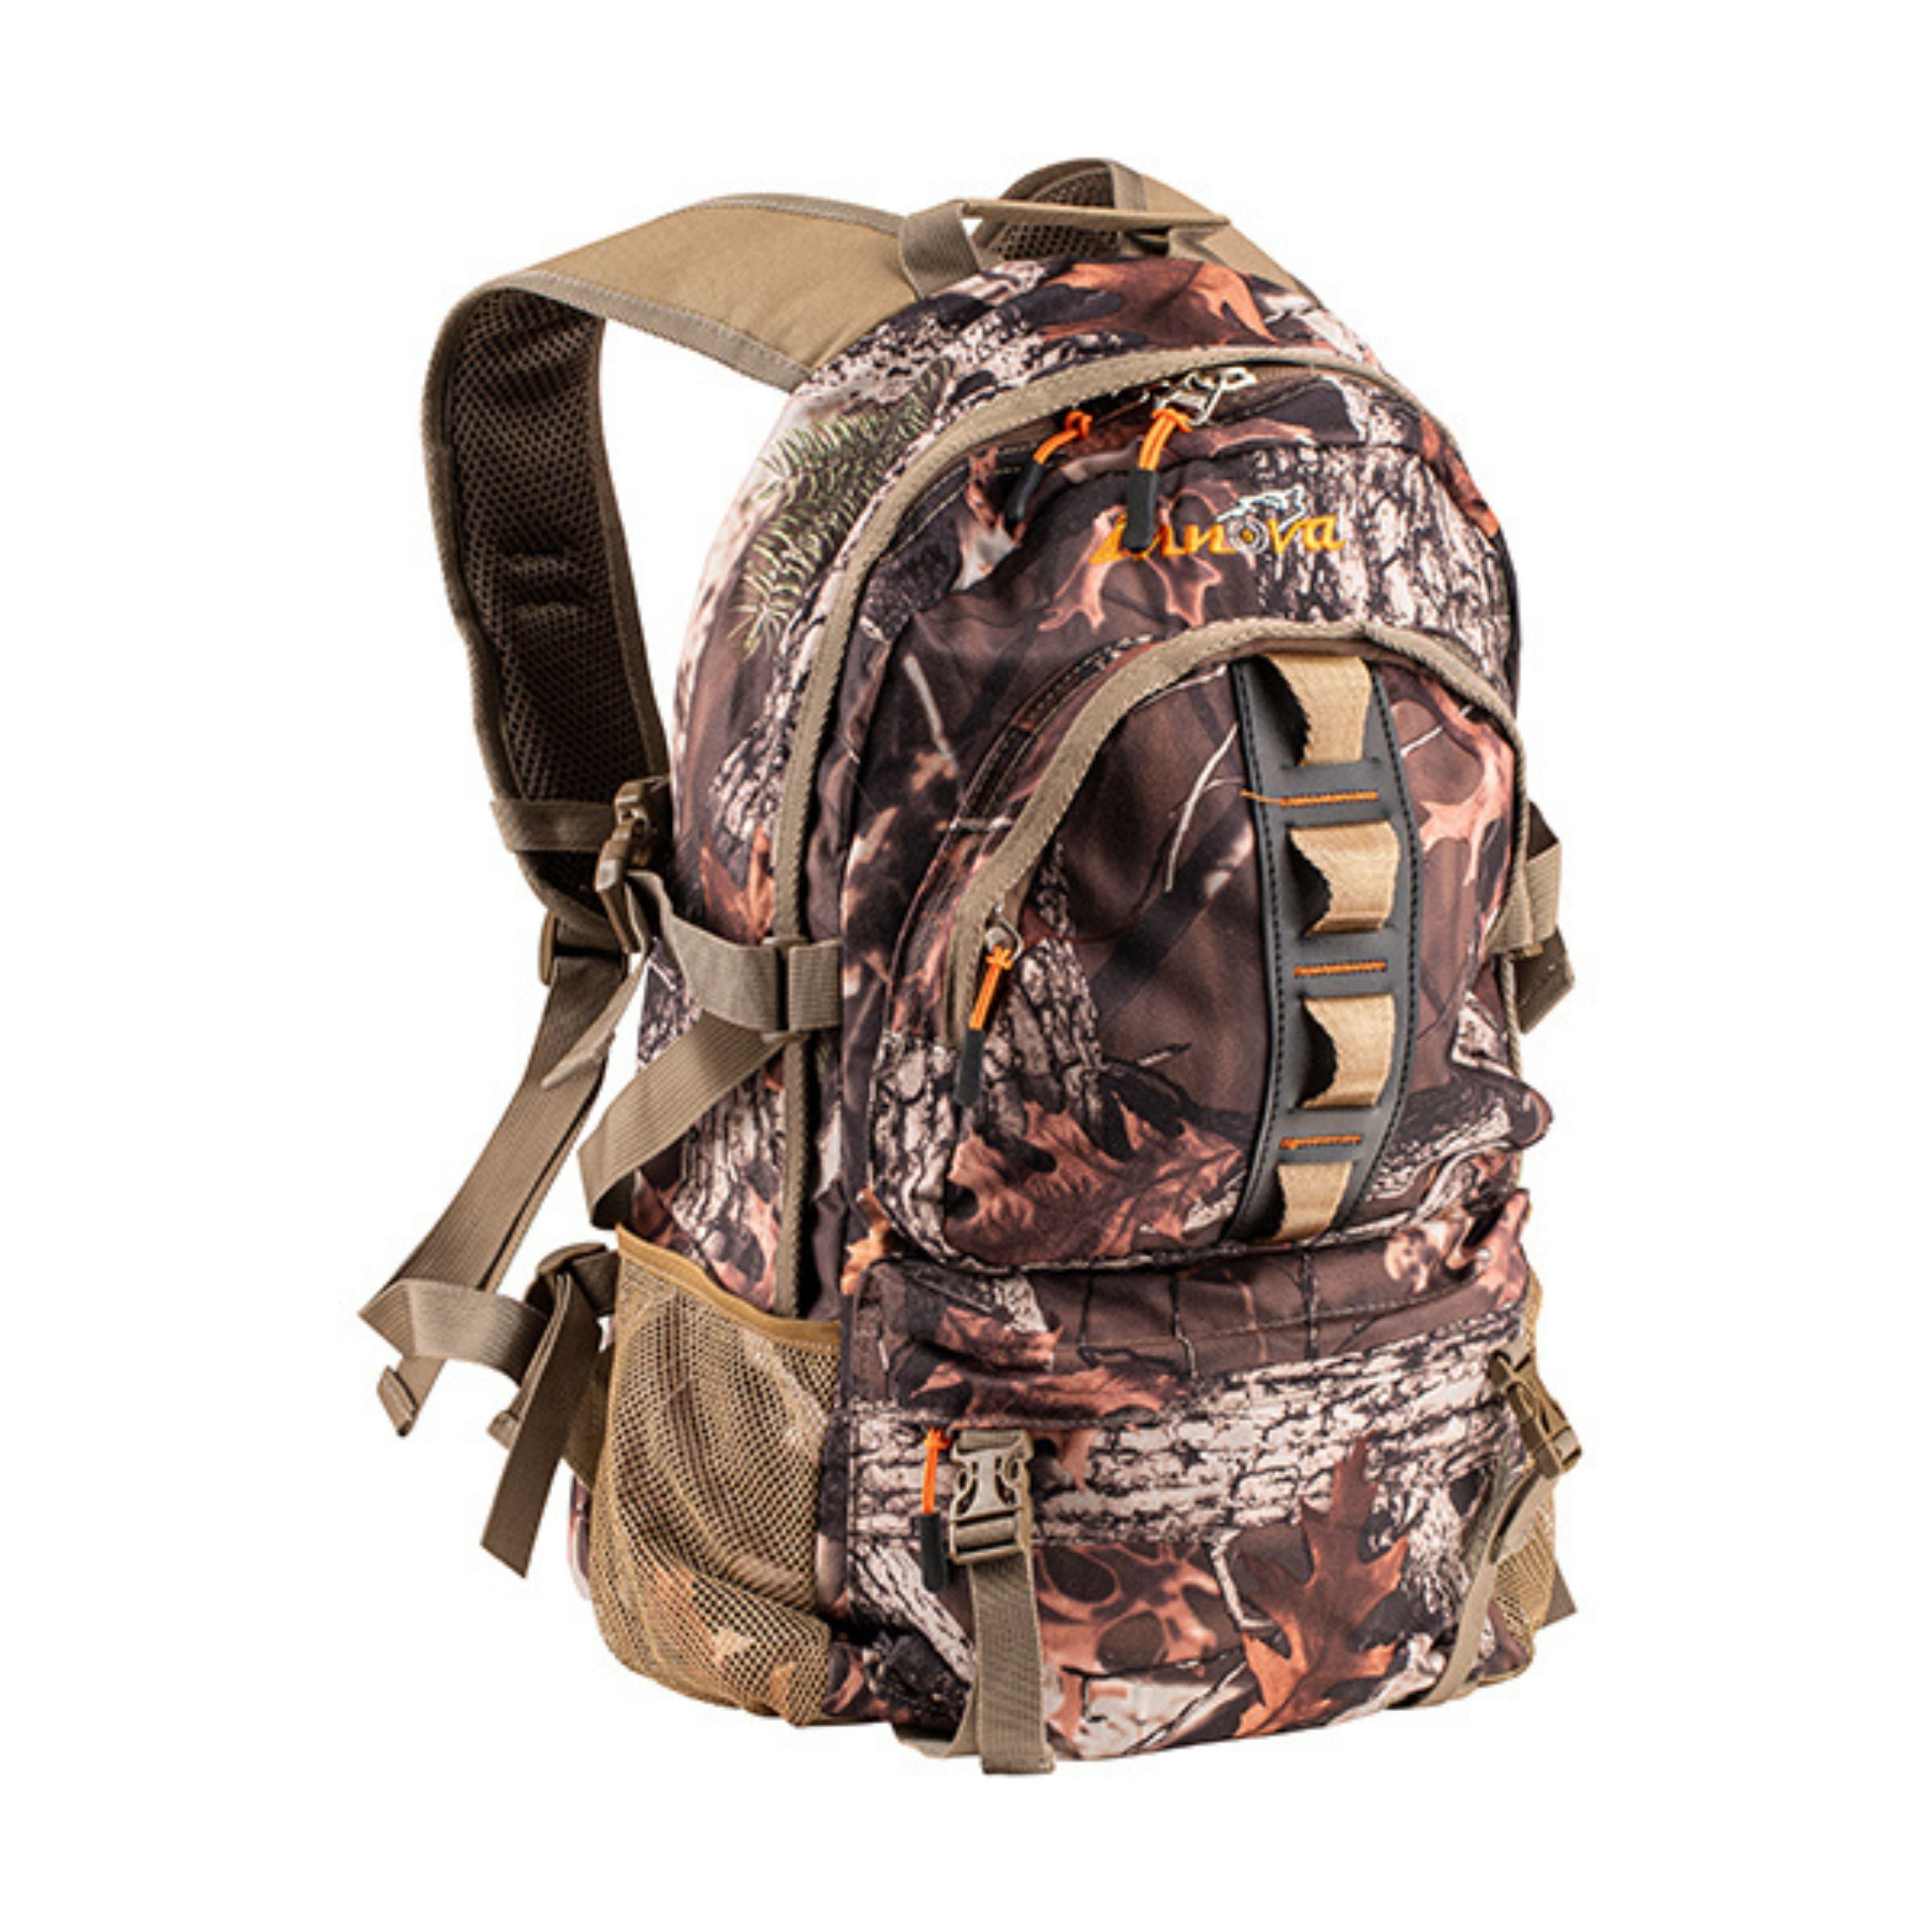 "Wood Expedition" Backpack - 30 L